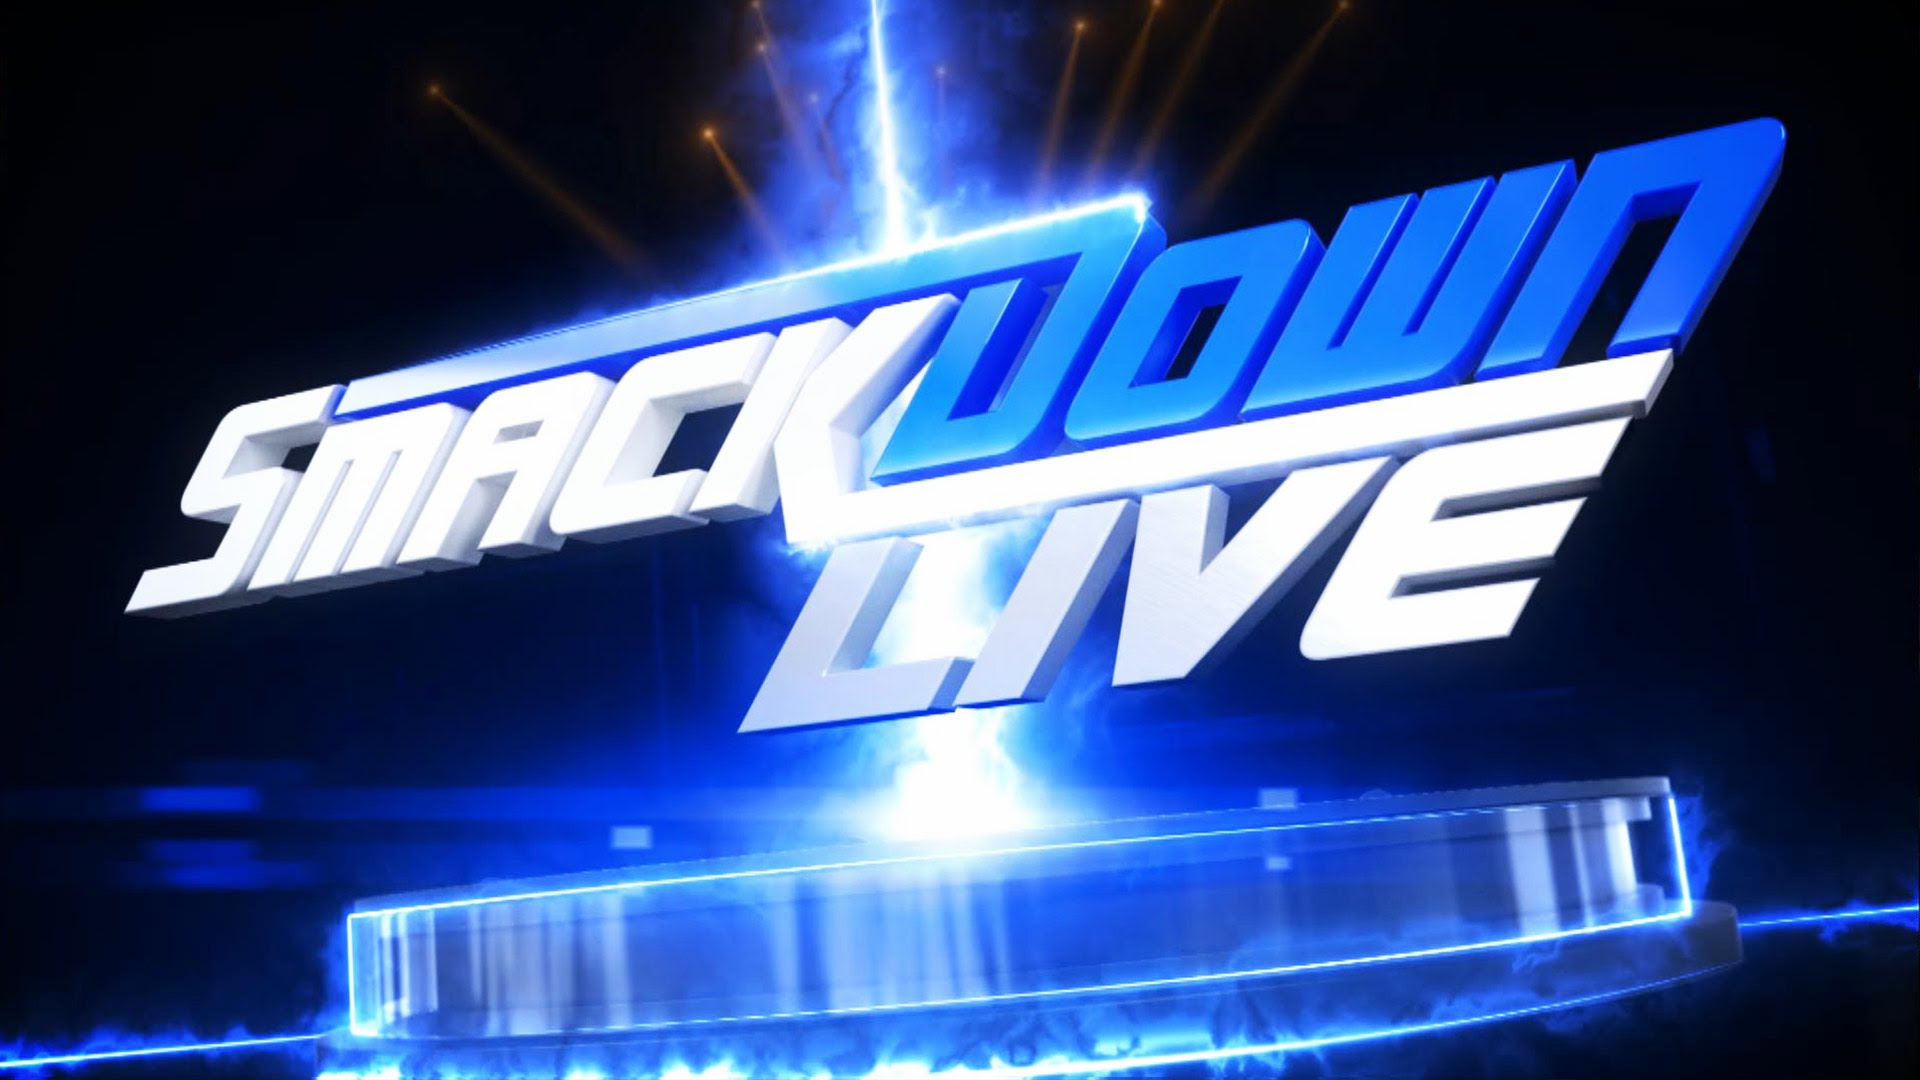 Free Download Wwe Smackdown Hd Wallpapers 1920x1080 For Your Desktop Mobile Tablet Explore 77 Wwe Smackdown Wallpapers Cool Wwe Wallpapers Wwe Wallpapers Free Wwe Raw Wallpaper